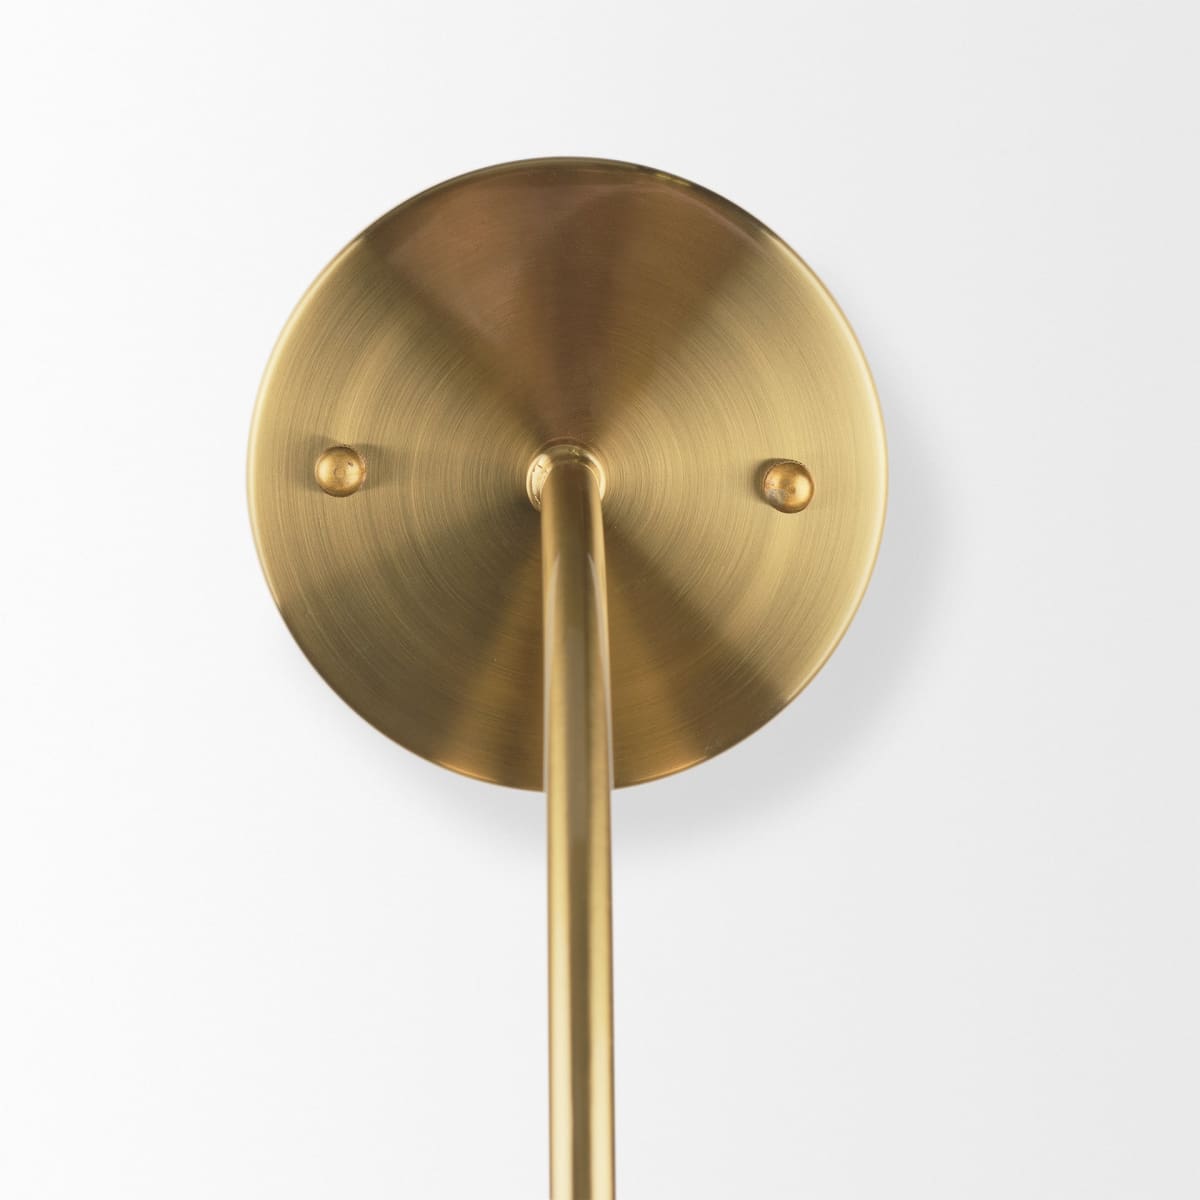 Cybill Wall Sconce Gold Metal | White Shade - wall-fixtures